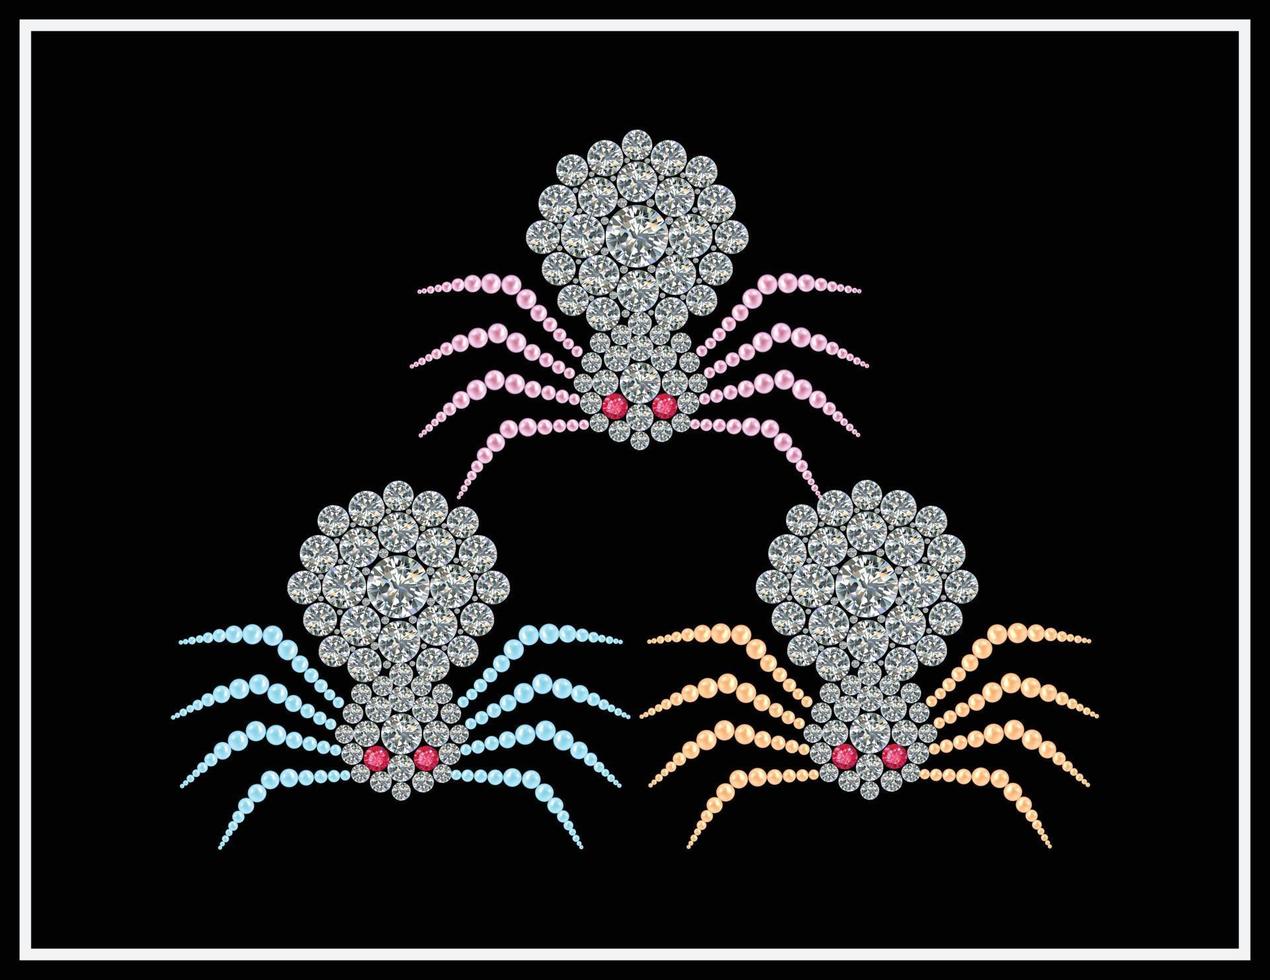 Spider vector set made with pearl and diamond rhinestone